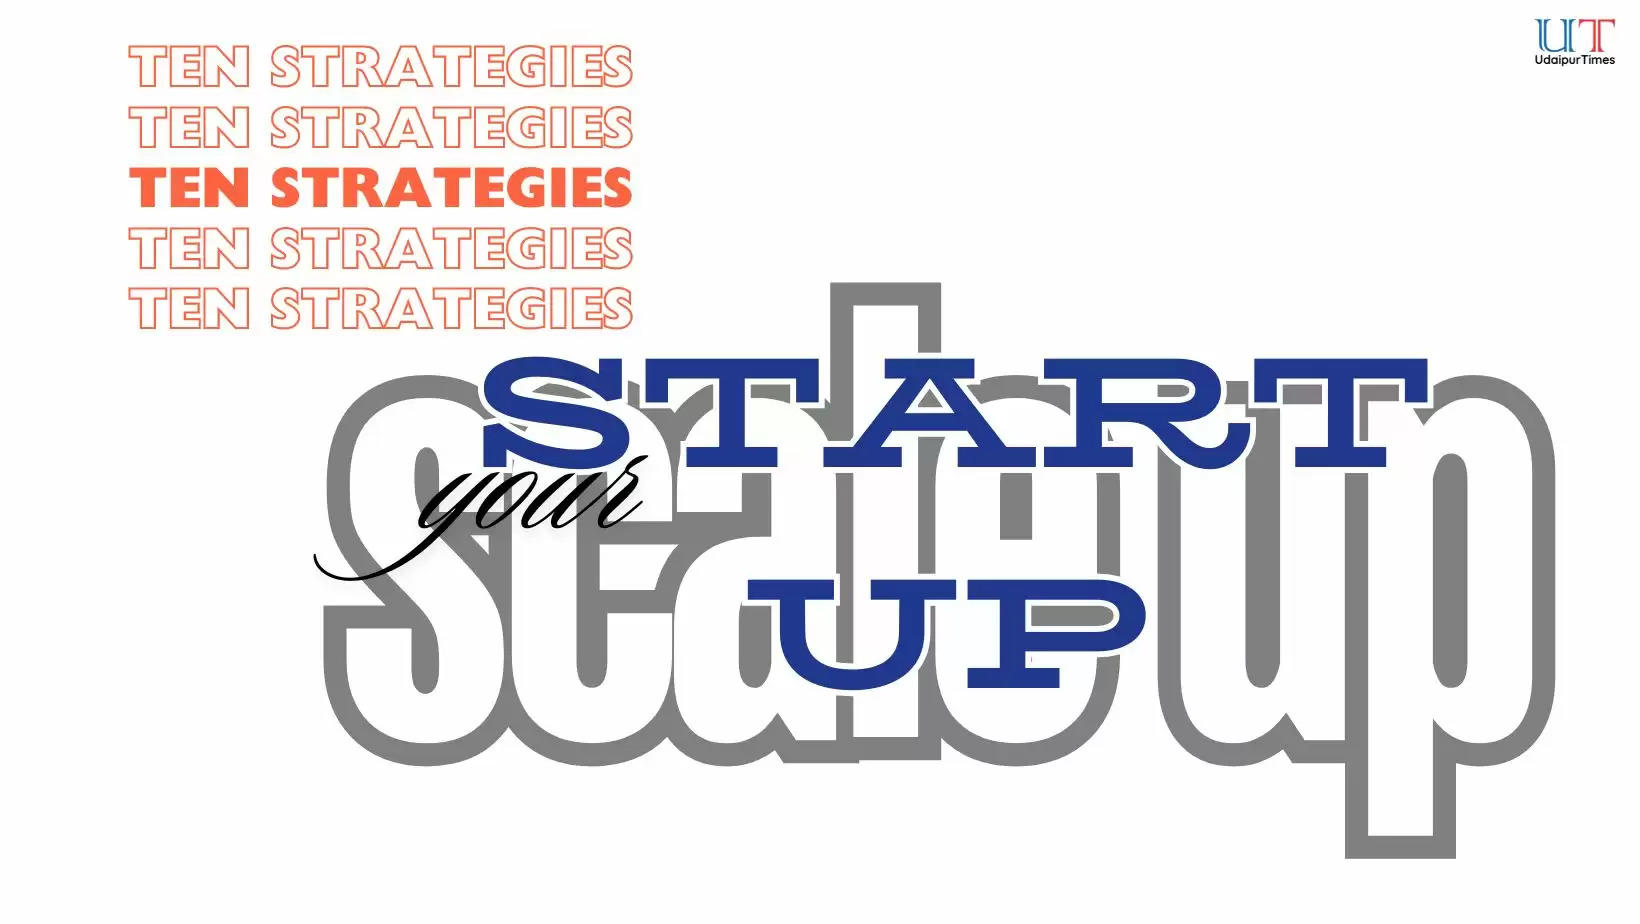 How to Scale Up your Start Up, 10 Strategies to Scale Up your Start Up